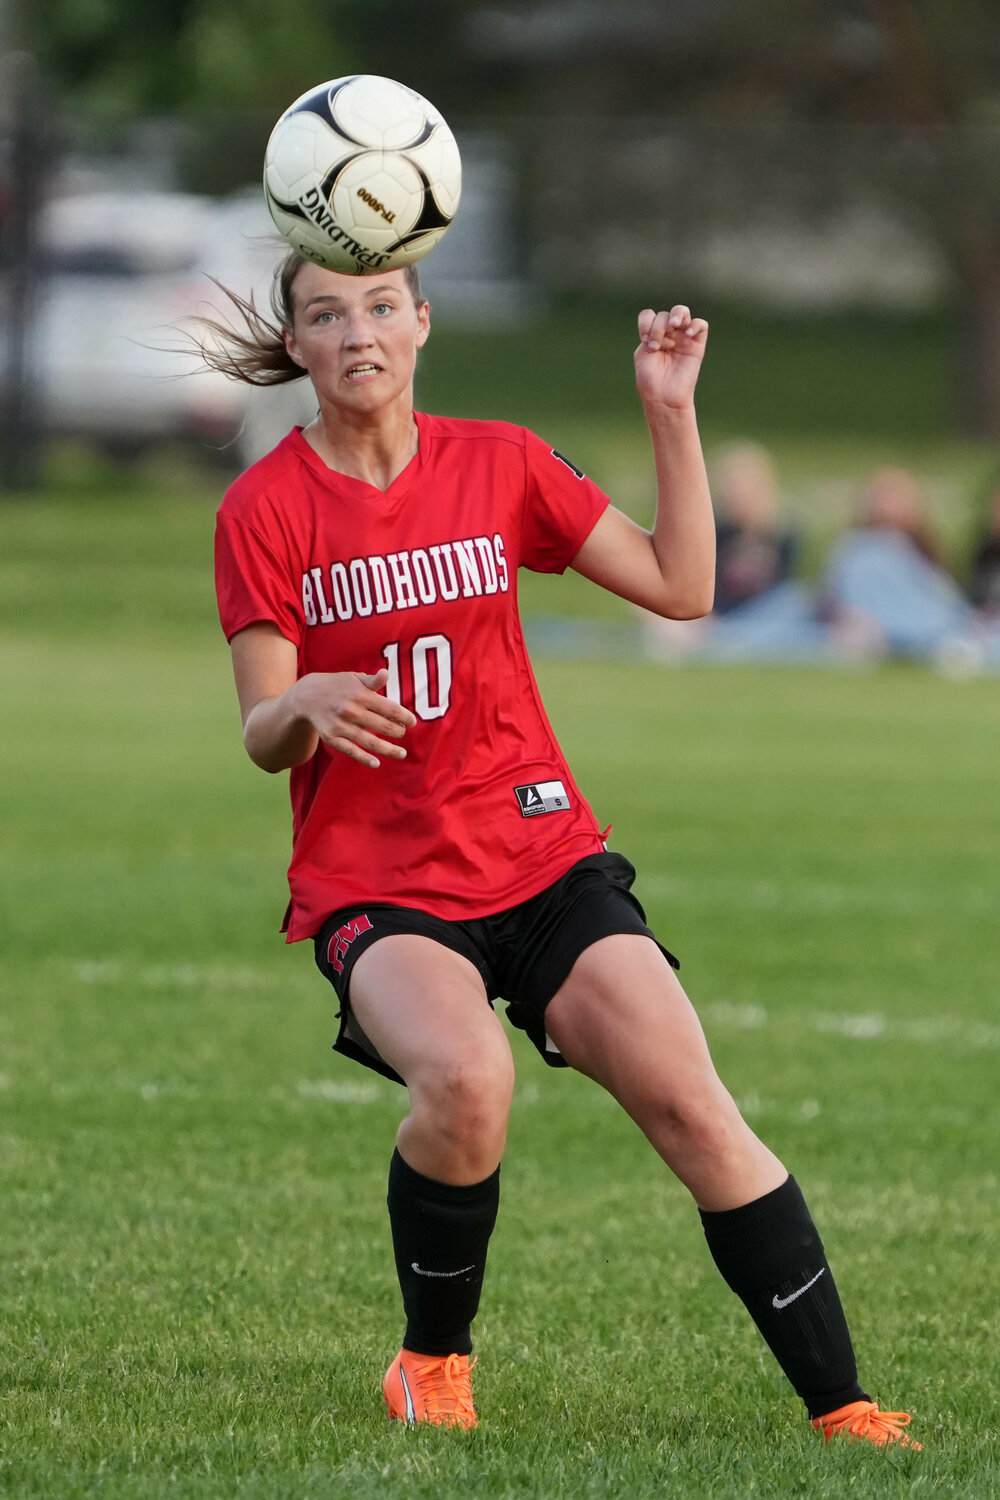 Olivia Kraus (10) heads the ball during their Class 2A Region 5 quarterfinal game against Keokuk High School, Friday, May 19, 2023 at Fort Madison's Baxter Sports Complex. Fort Madison won 6-0.